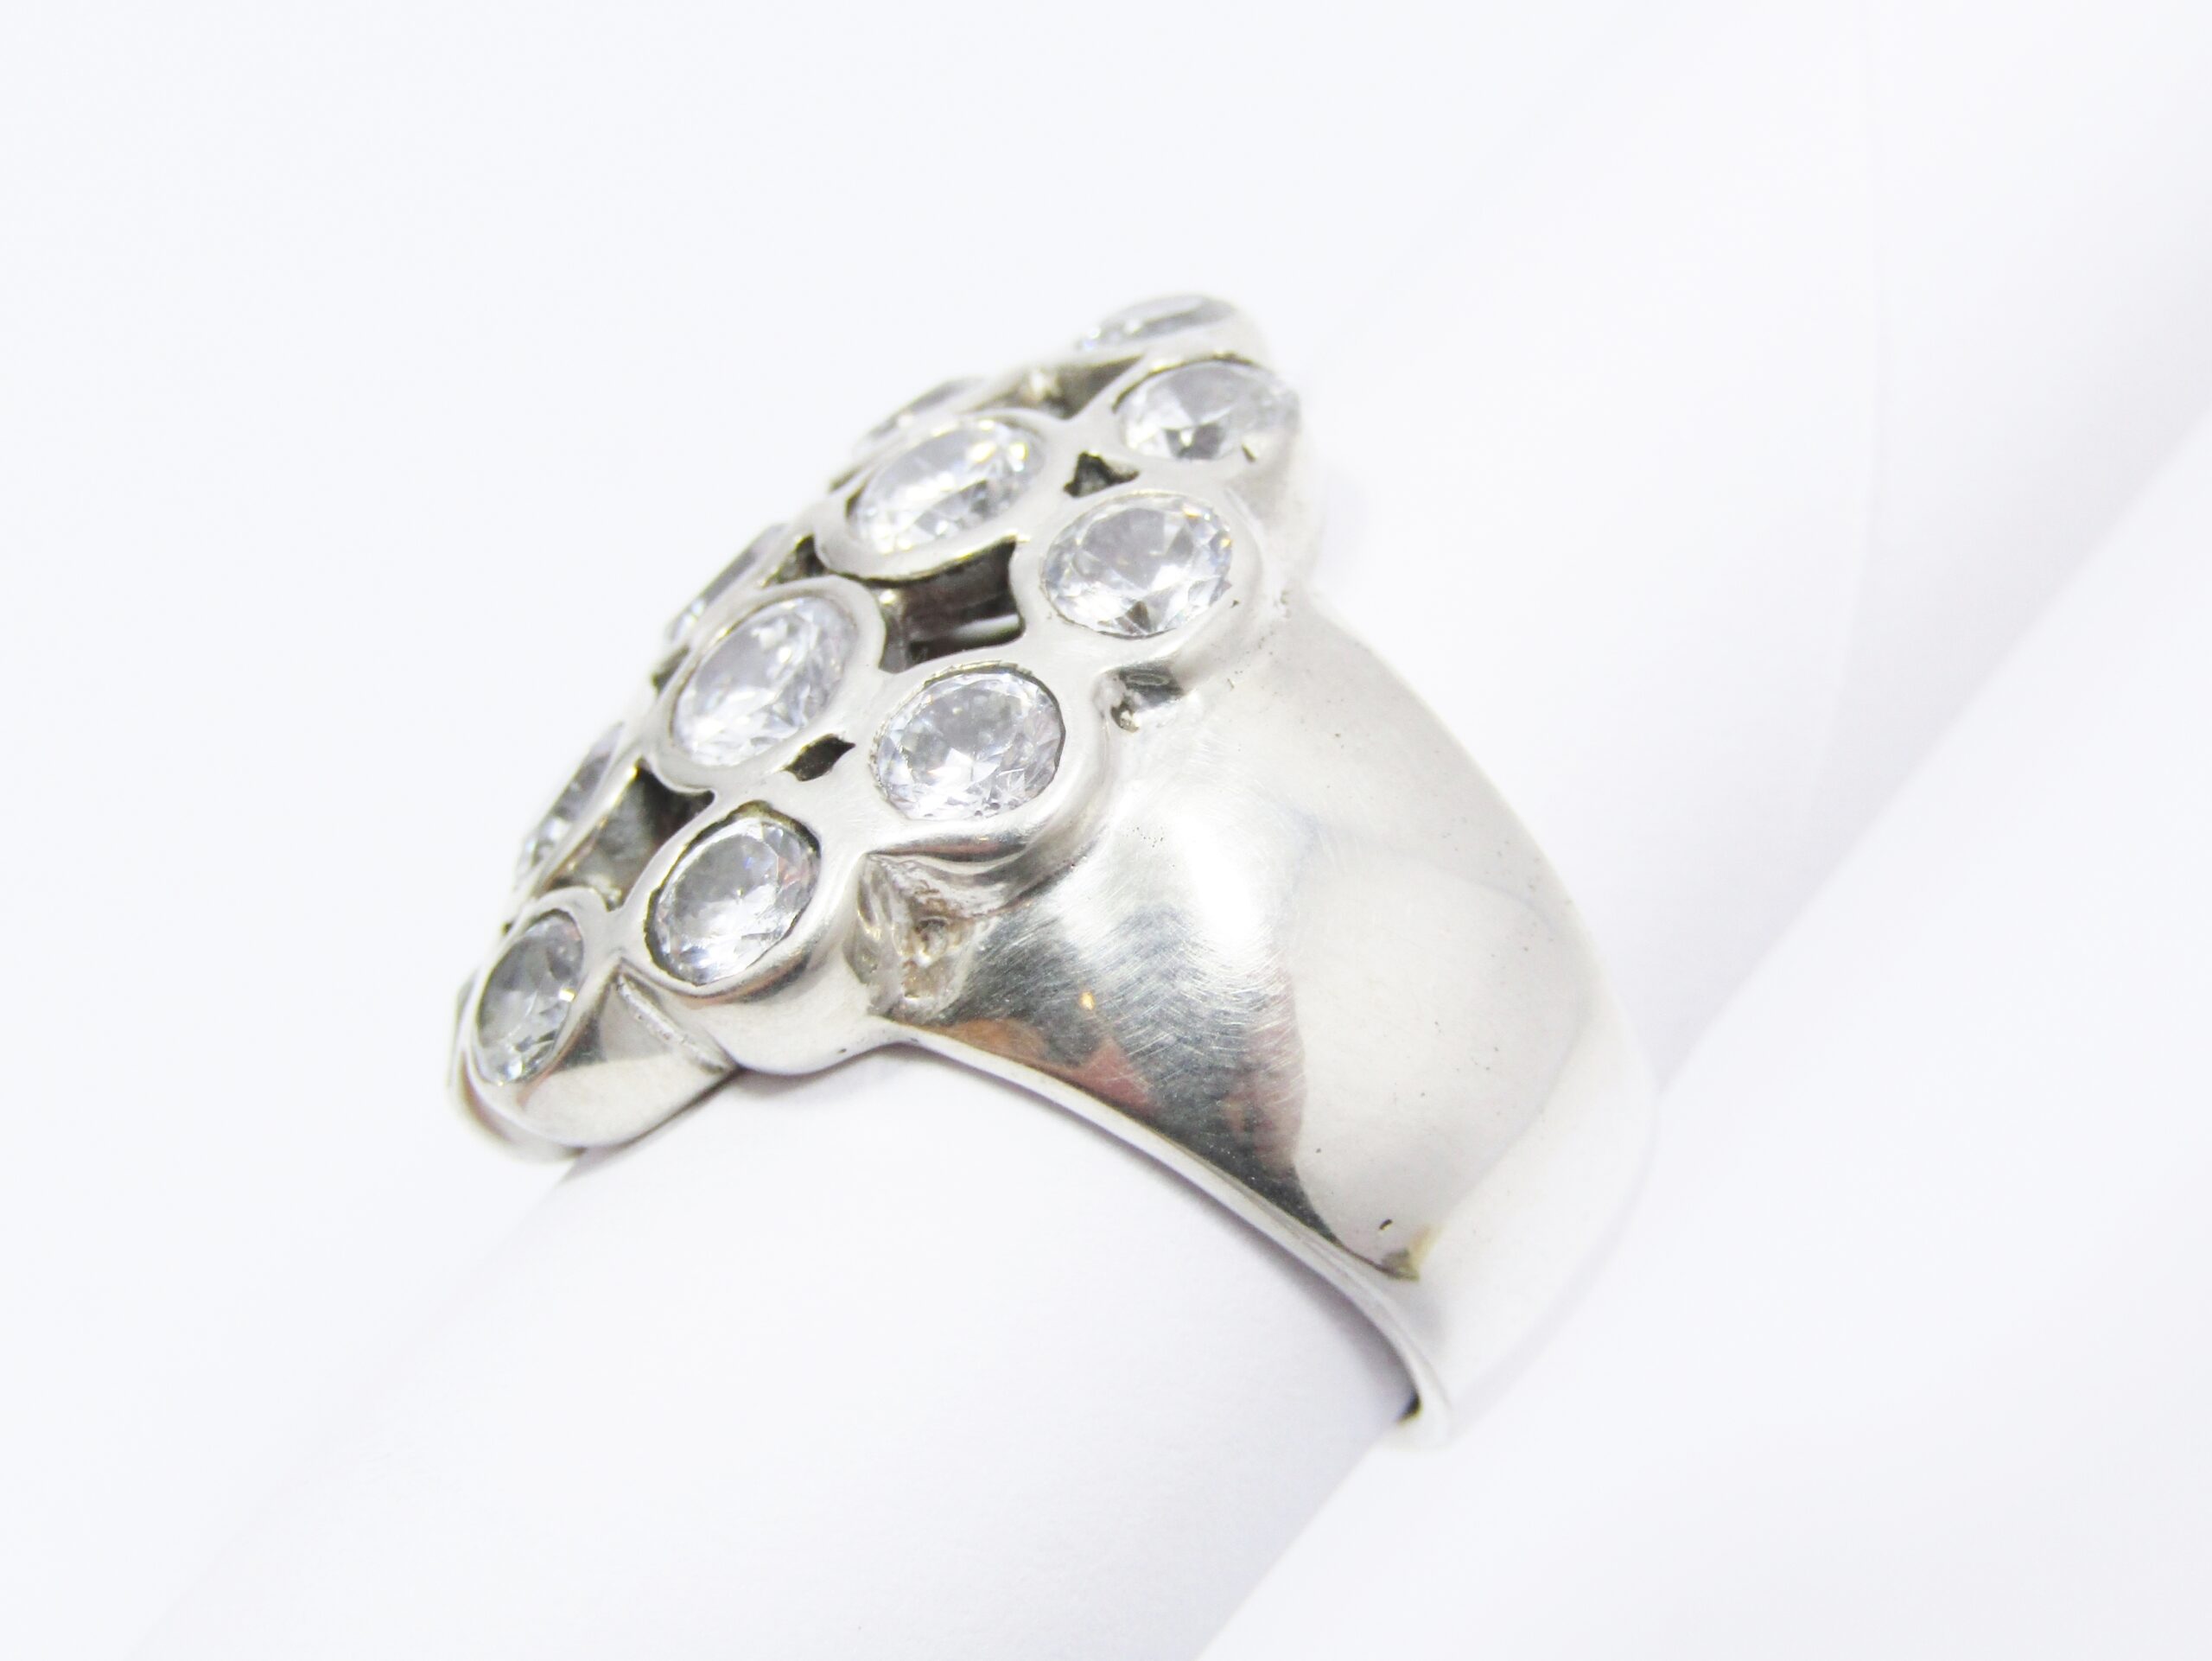 A Stunning Huge Clear Zirconia Ring in Sterling Silver.